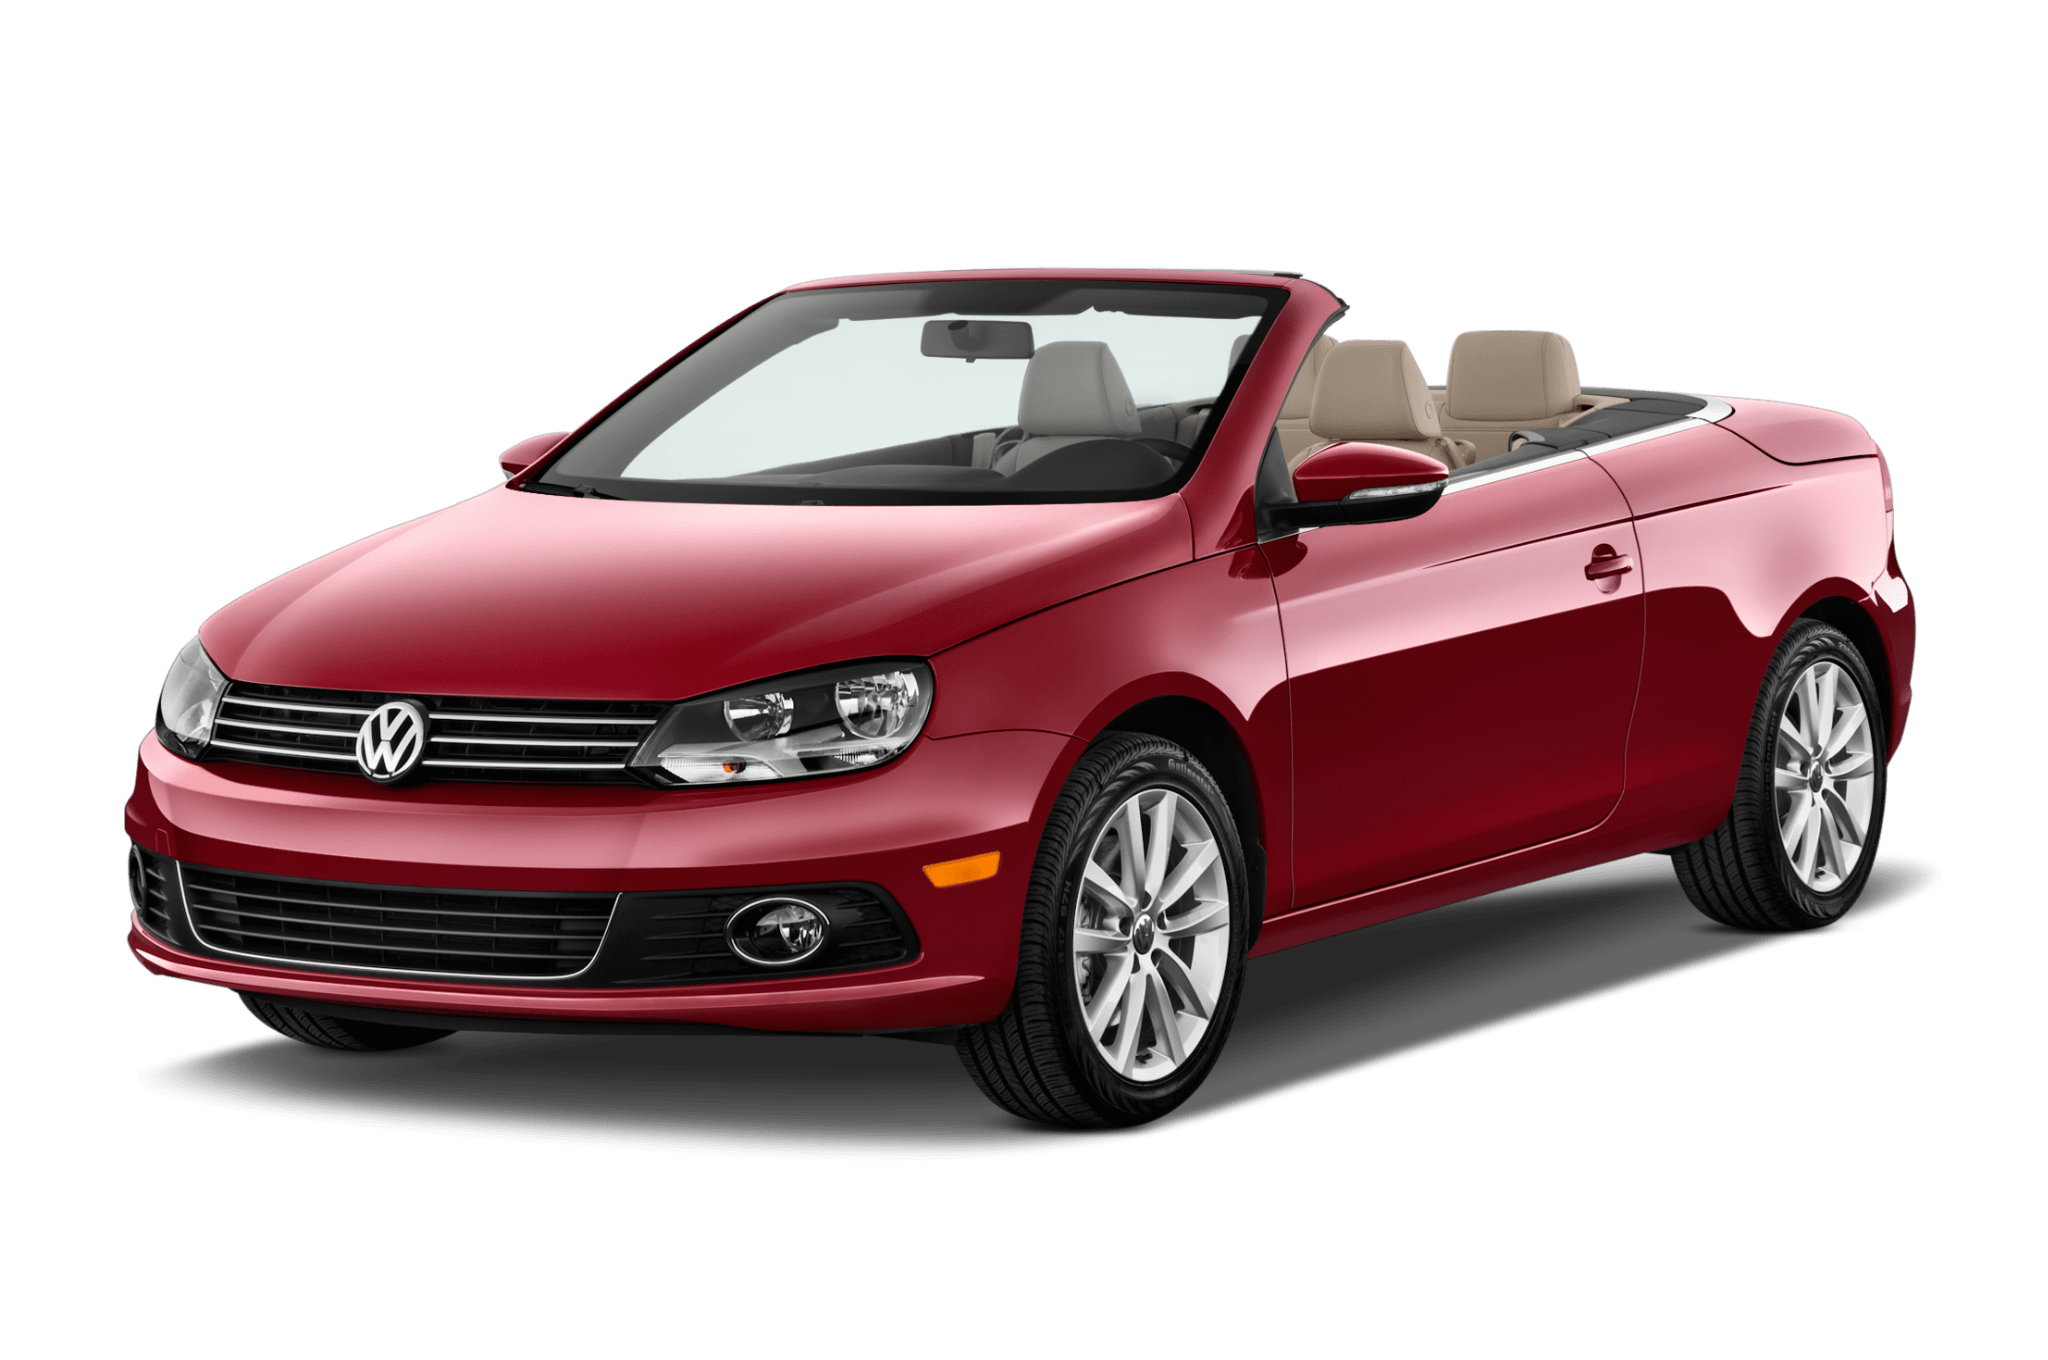 https://carsguide-res.cloudinary.com/image/upload/f_auto,fl_lossy,q_auto,t_default/v1/editorial/volkswagen-eos-index.png